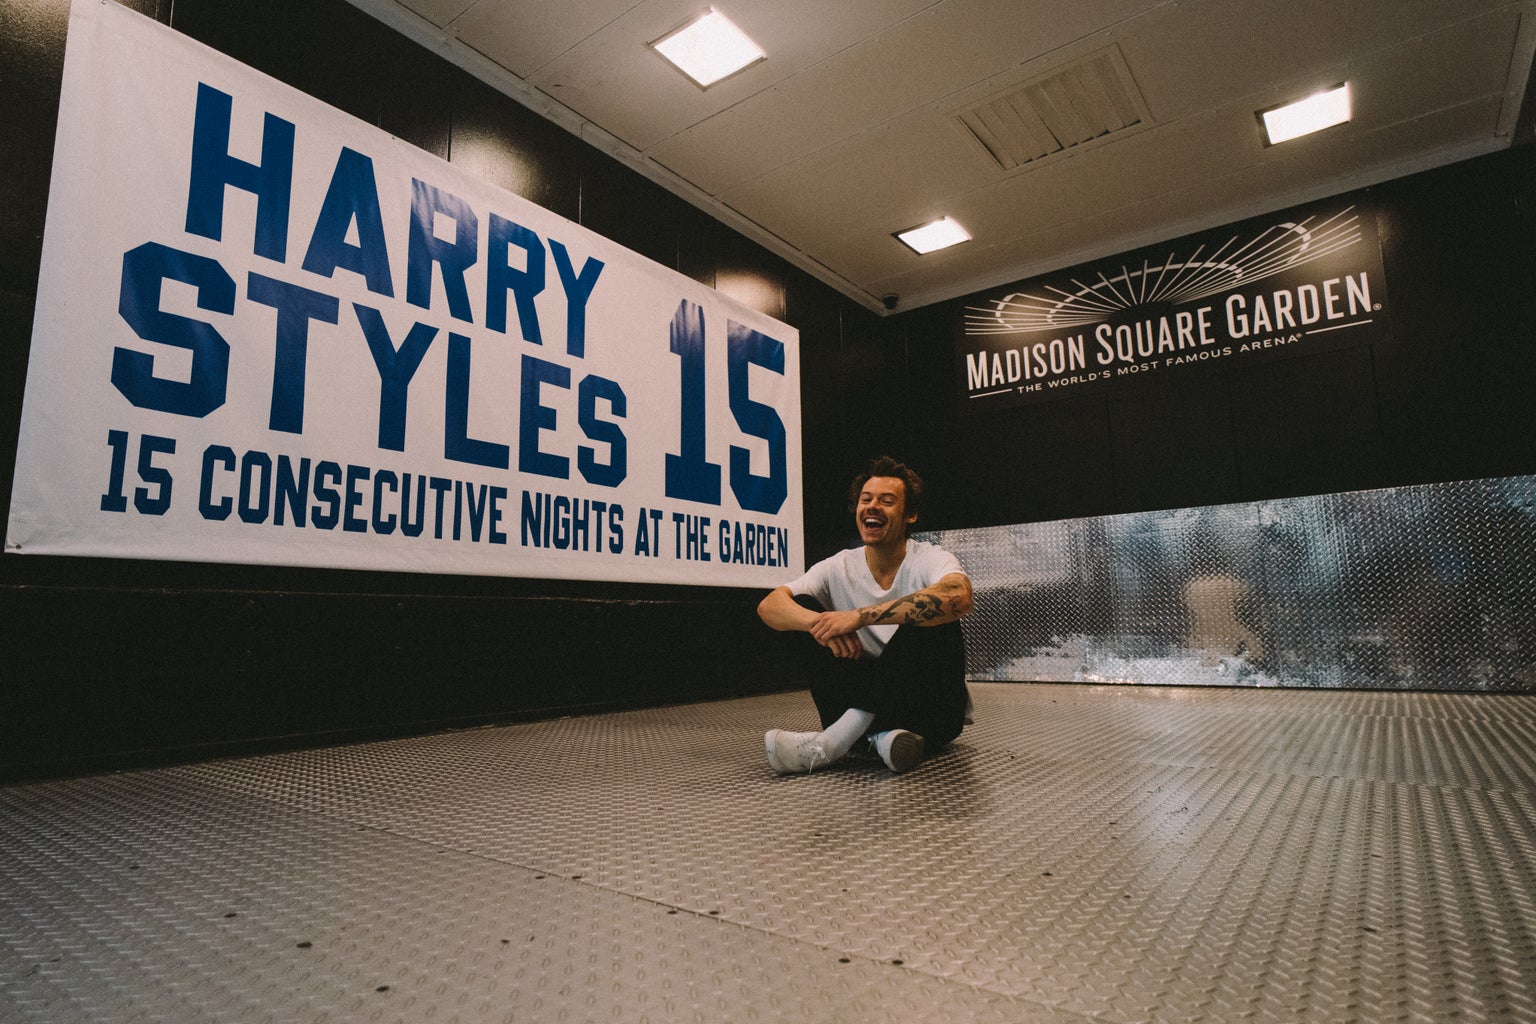 harry styles in front of msg banner smiling